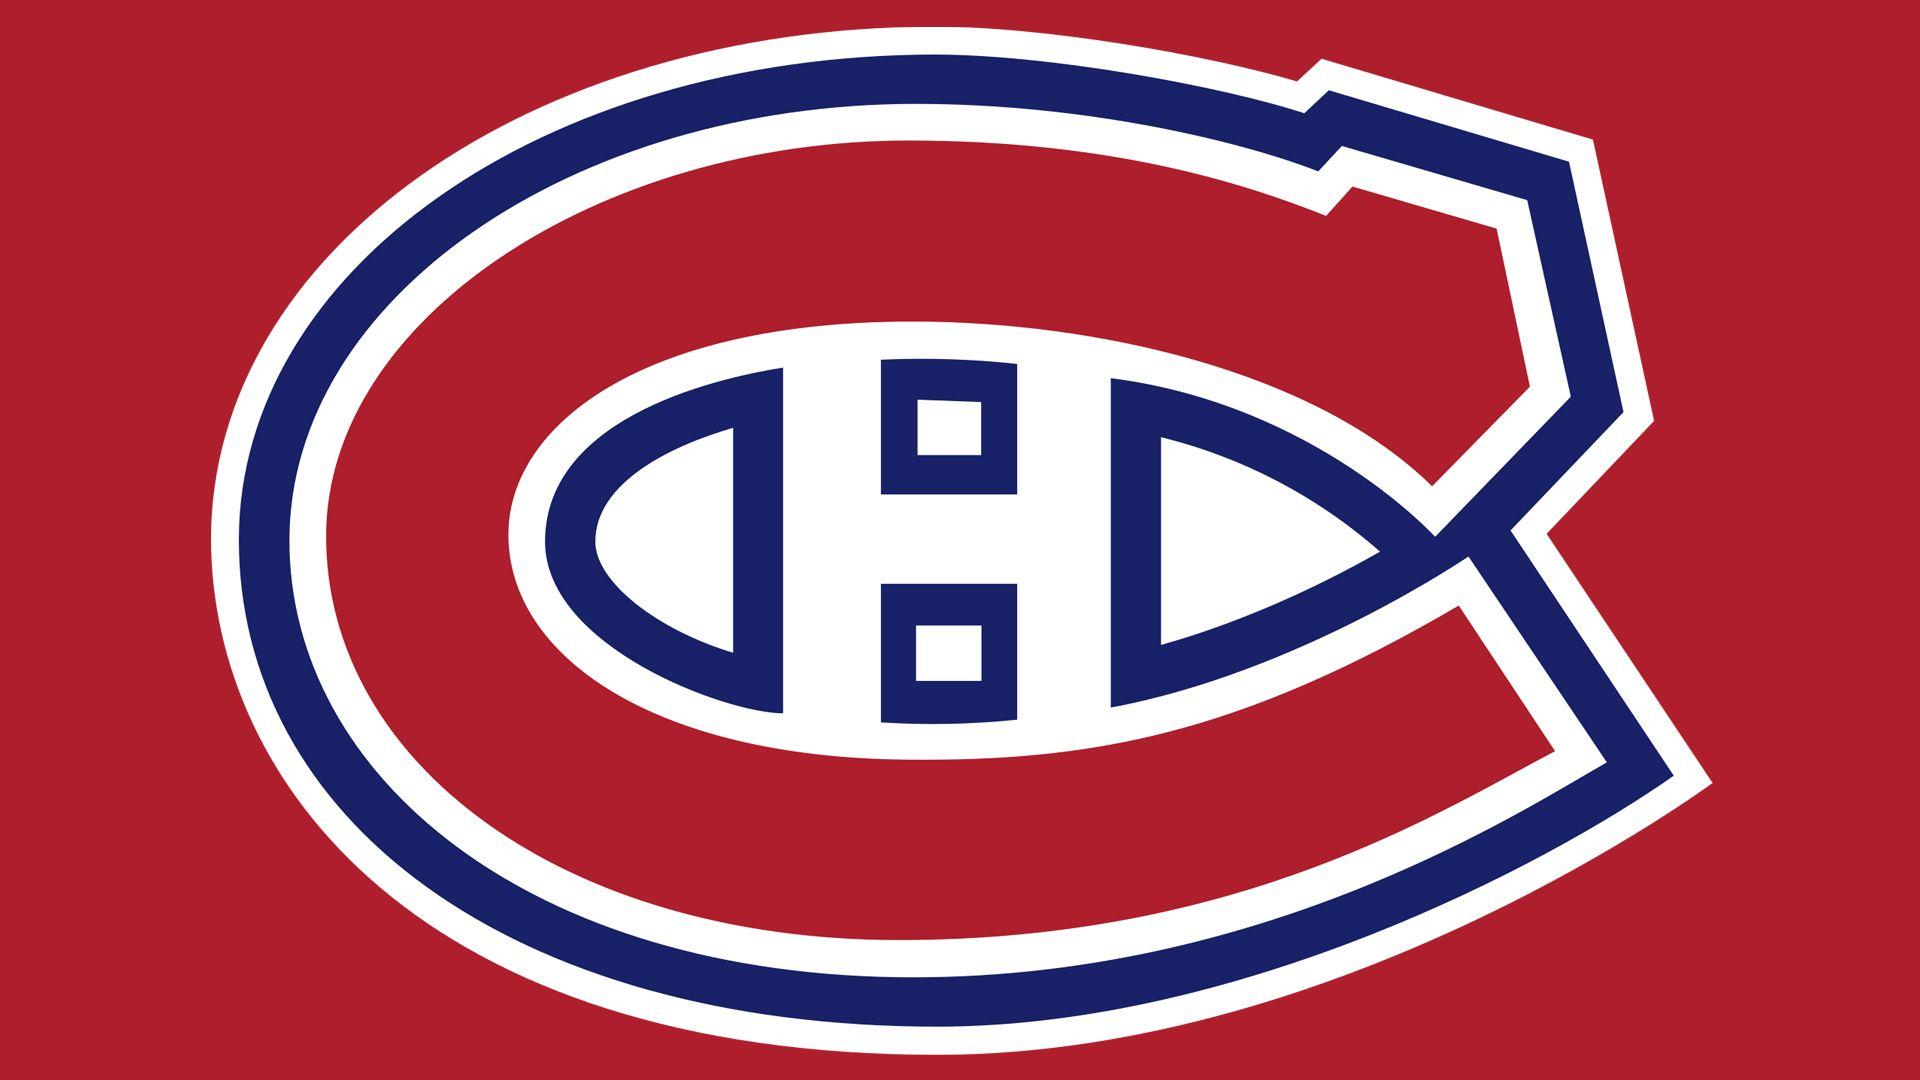 Large Red C Logo - Montreal Canadiens Logo, Montreal Canadiens Symbol, Meaning, History ...